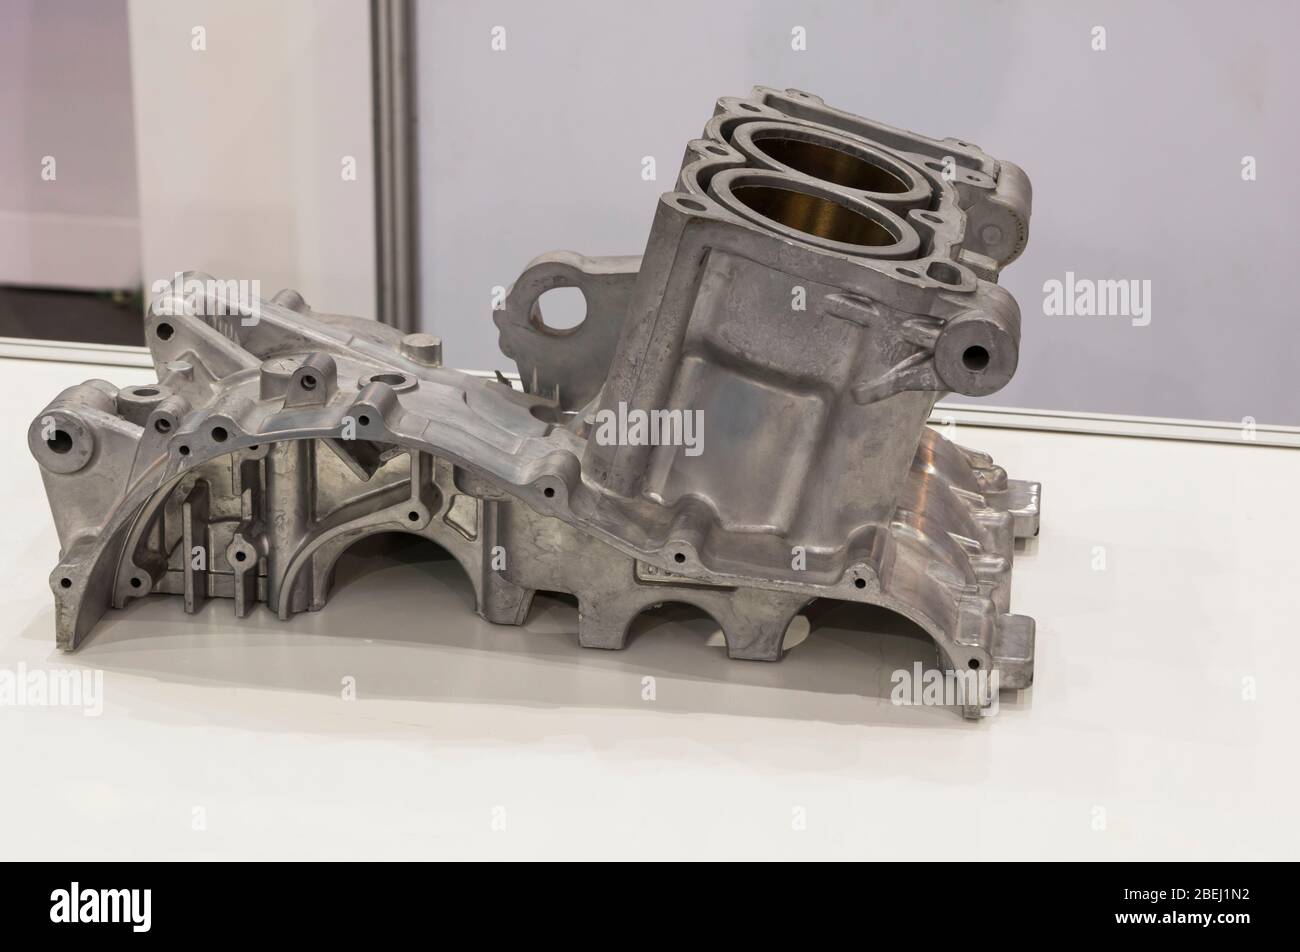 Aluminium Die Casting Products Made From High Pressure Injection Machine Using Molten Metal And Metal Tooling Or Mold Adc12 Engineering Background Stock Photo Alamy